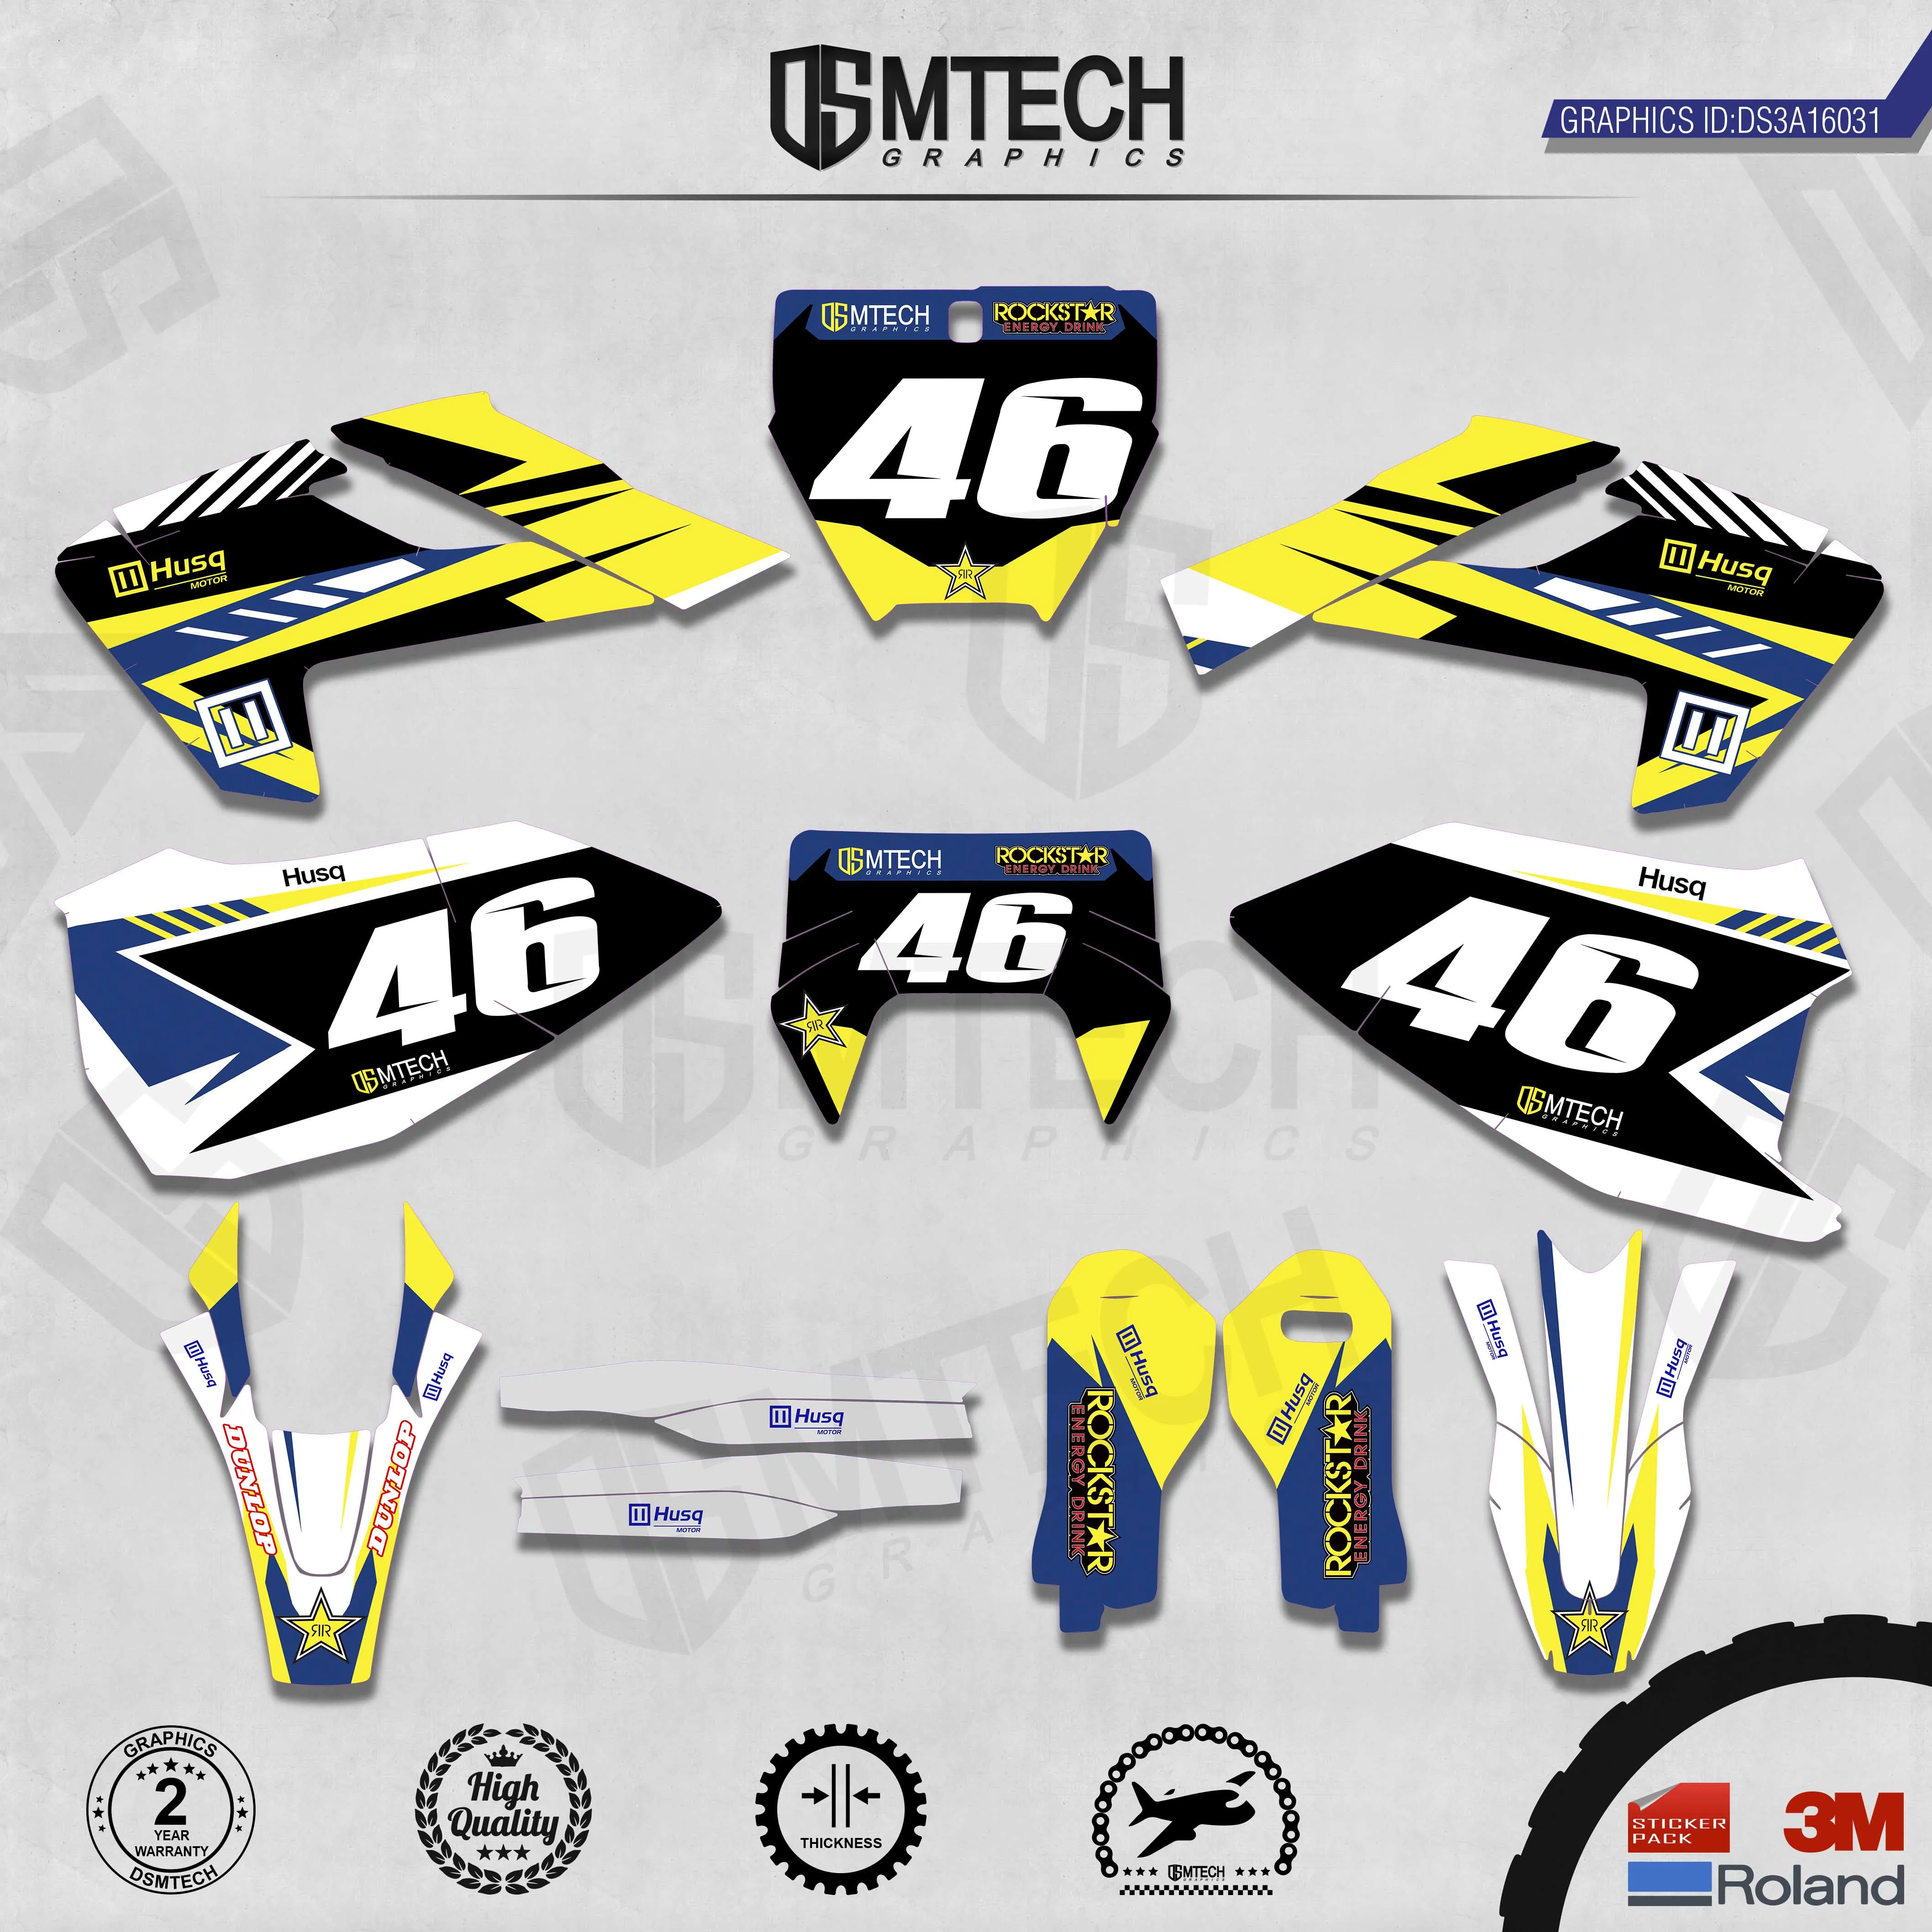 DSMTECH Customized Team Graphics Backgrounds Decals 3M Custom Stickers For TC FC TX FX FS 2016-2018  TE FE 2017-2019  031